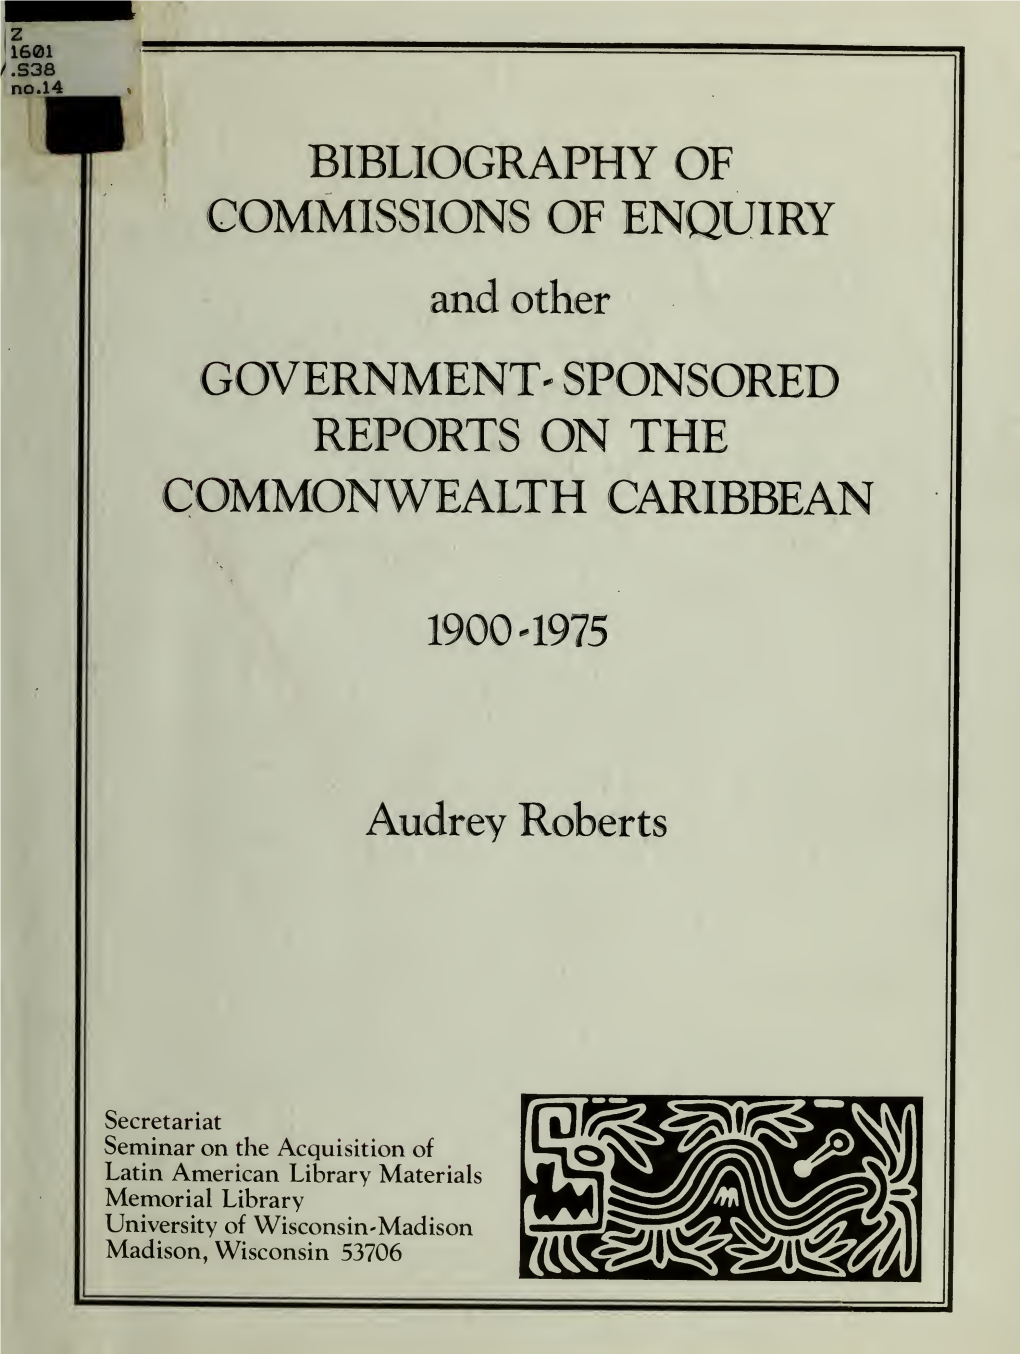 Bibliography of Commissions of Enquiry and Other Government-Sponsored Reports on the Commonwealth Caribbean